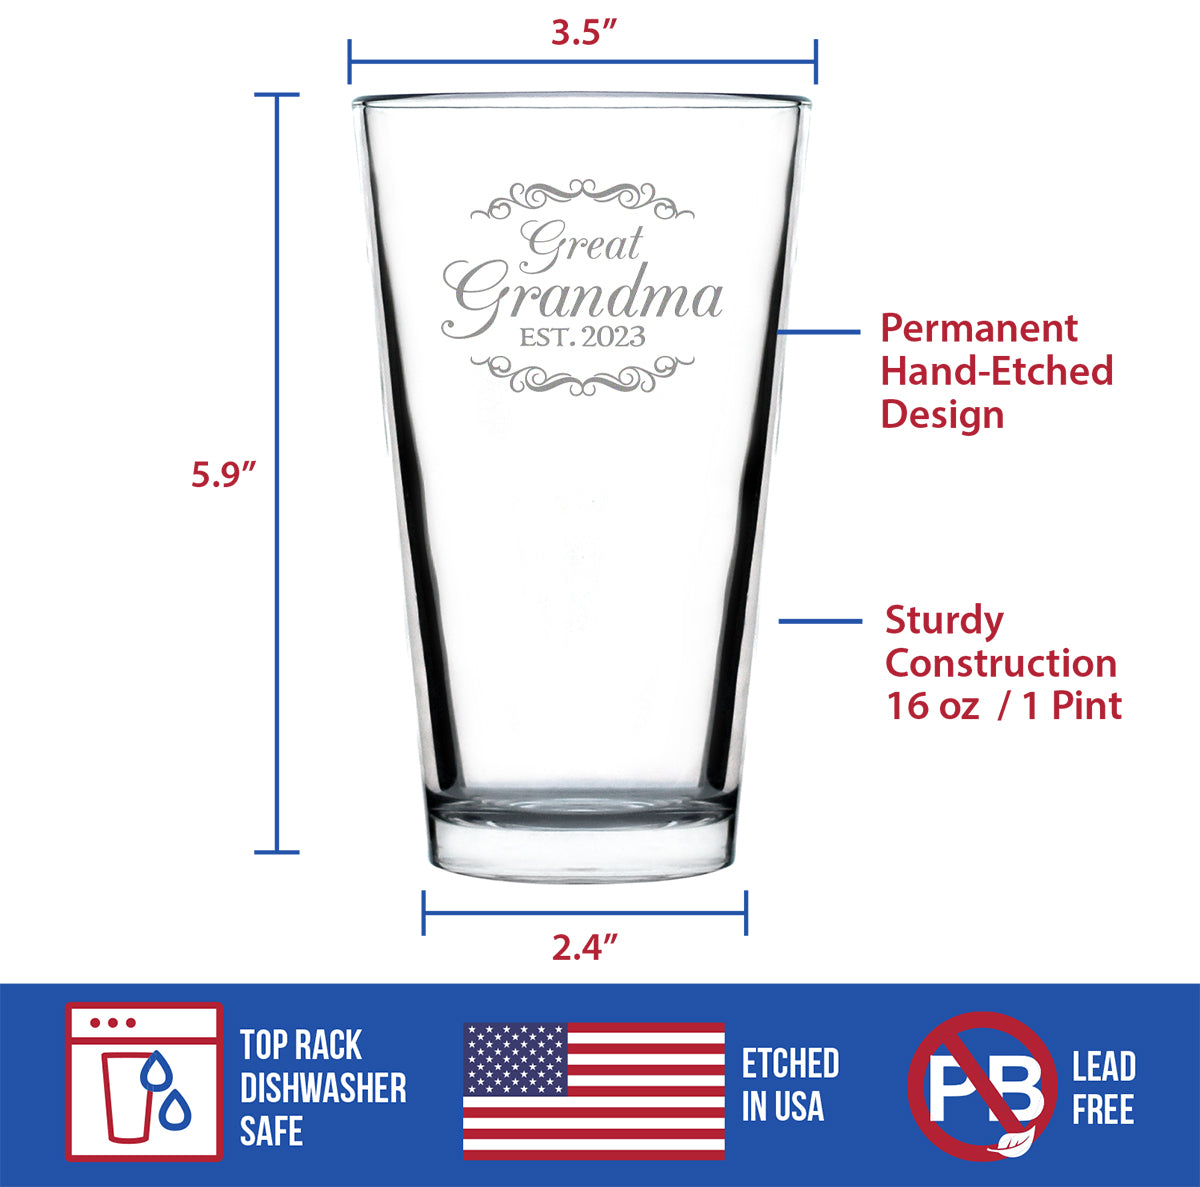 Great Grandma Est 2023 - New Great Grandmother Pint Glass Gift for First Time Great Grandparents - Decorative 16 Oz Glasses